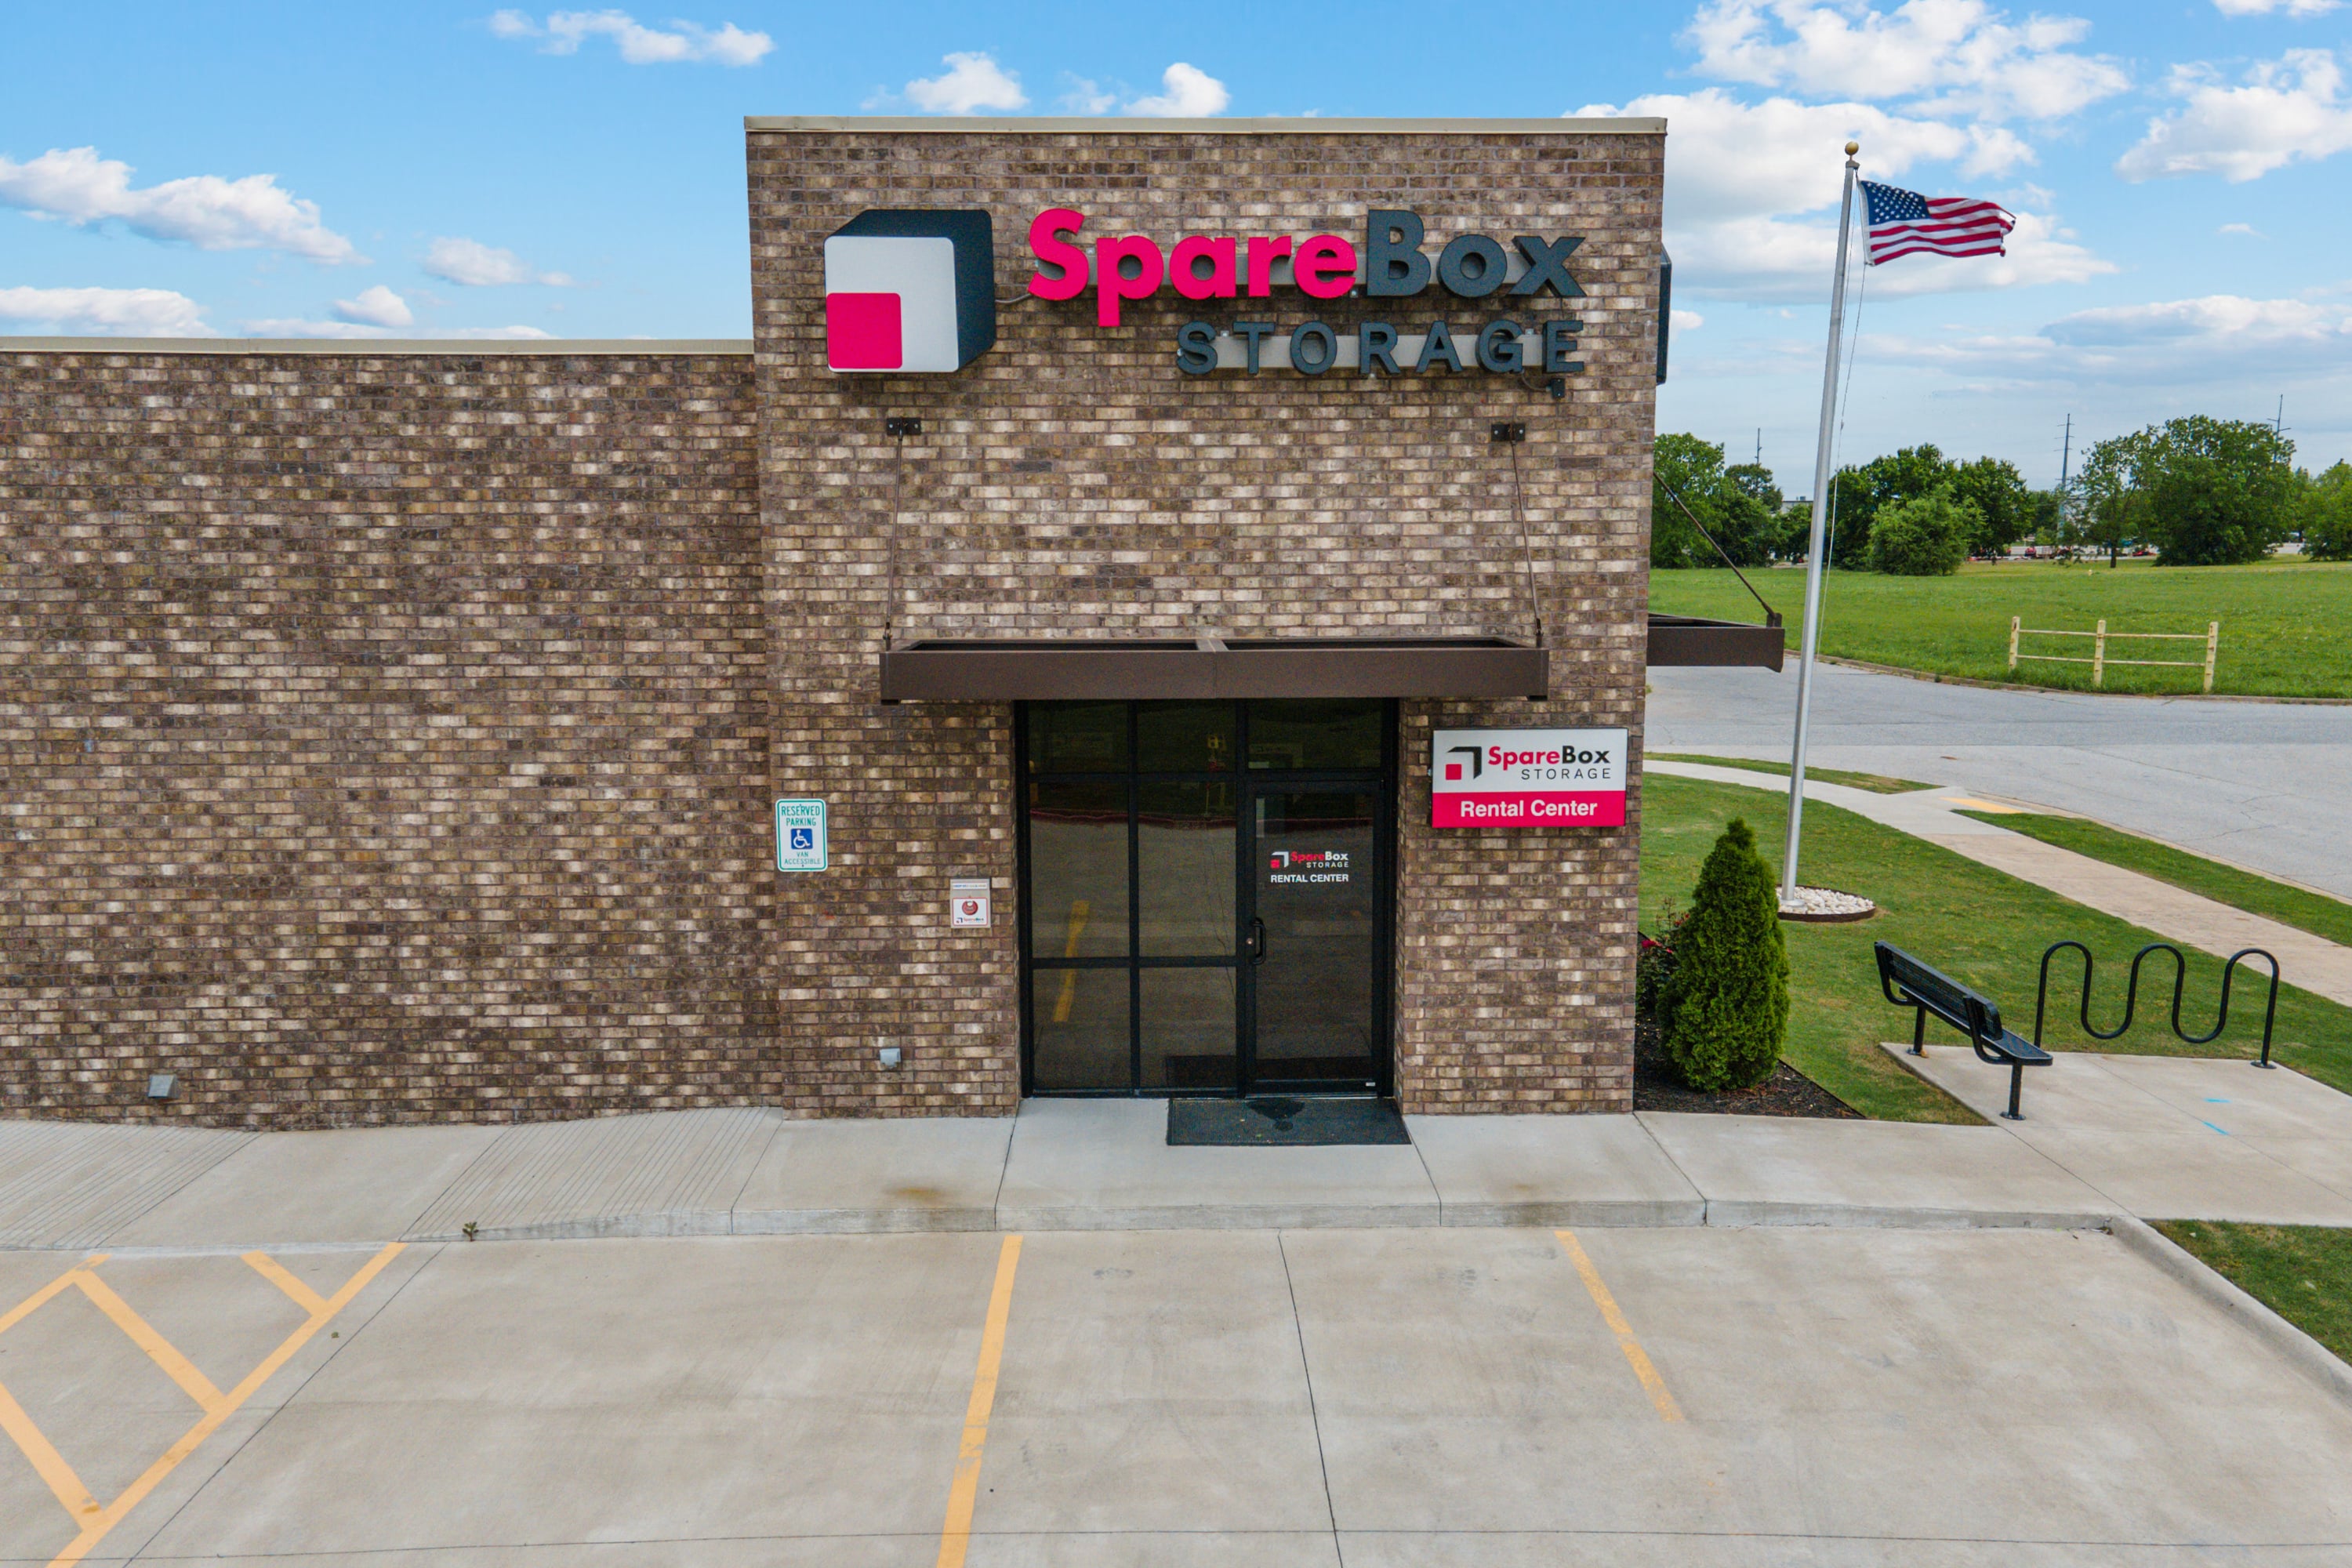 Meet all of your self storage needs in Bentonville, AR with our Southwest Vendor Boulevard location | SpareBox Storage